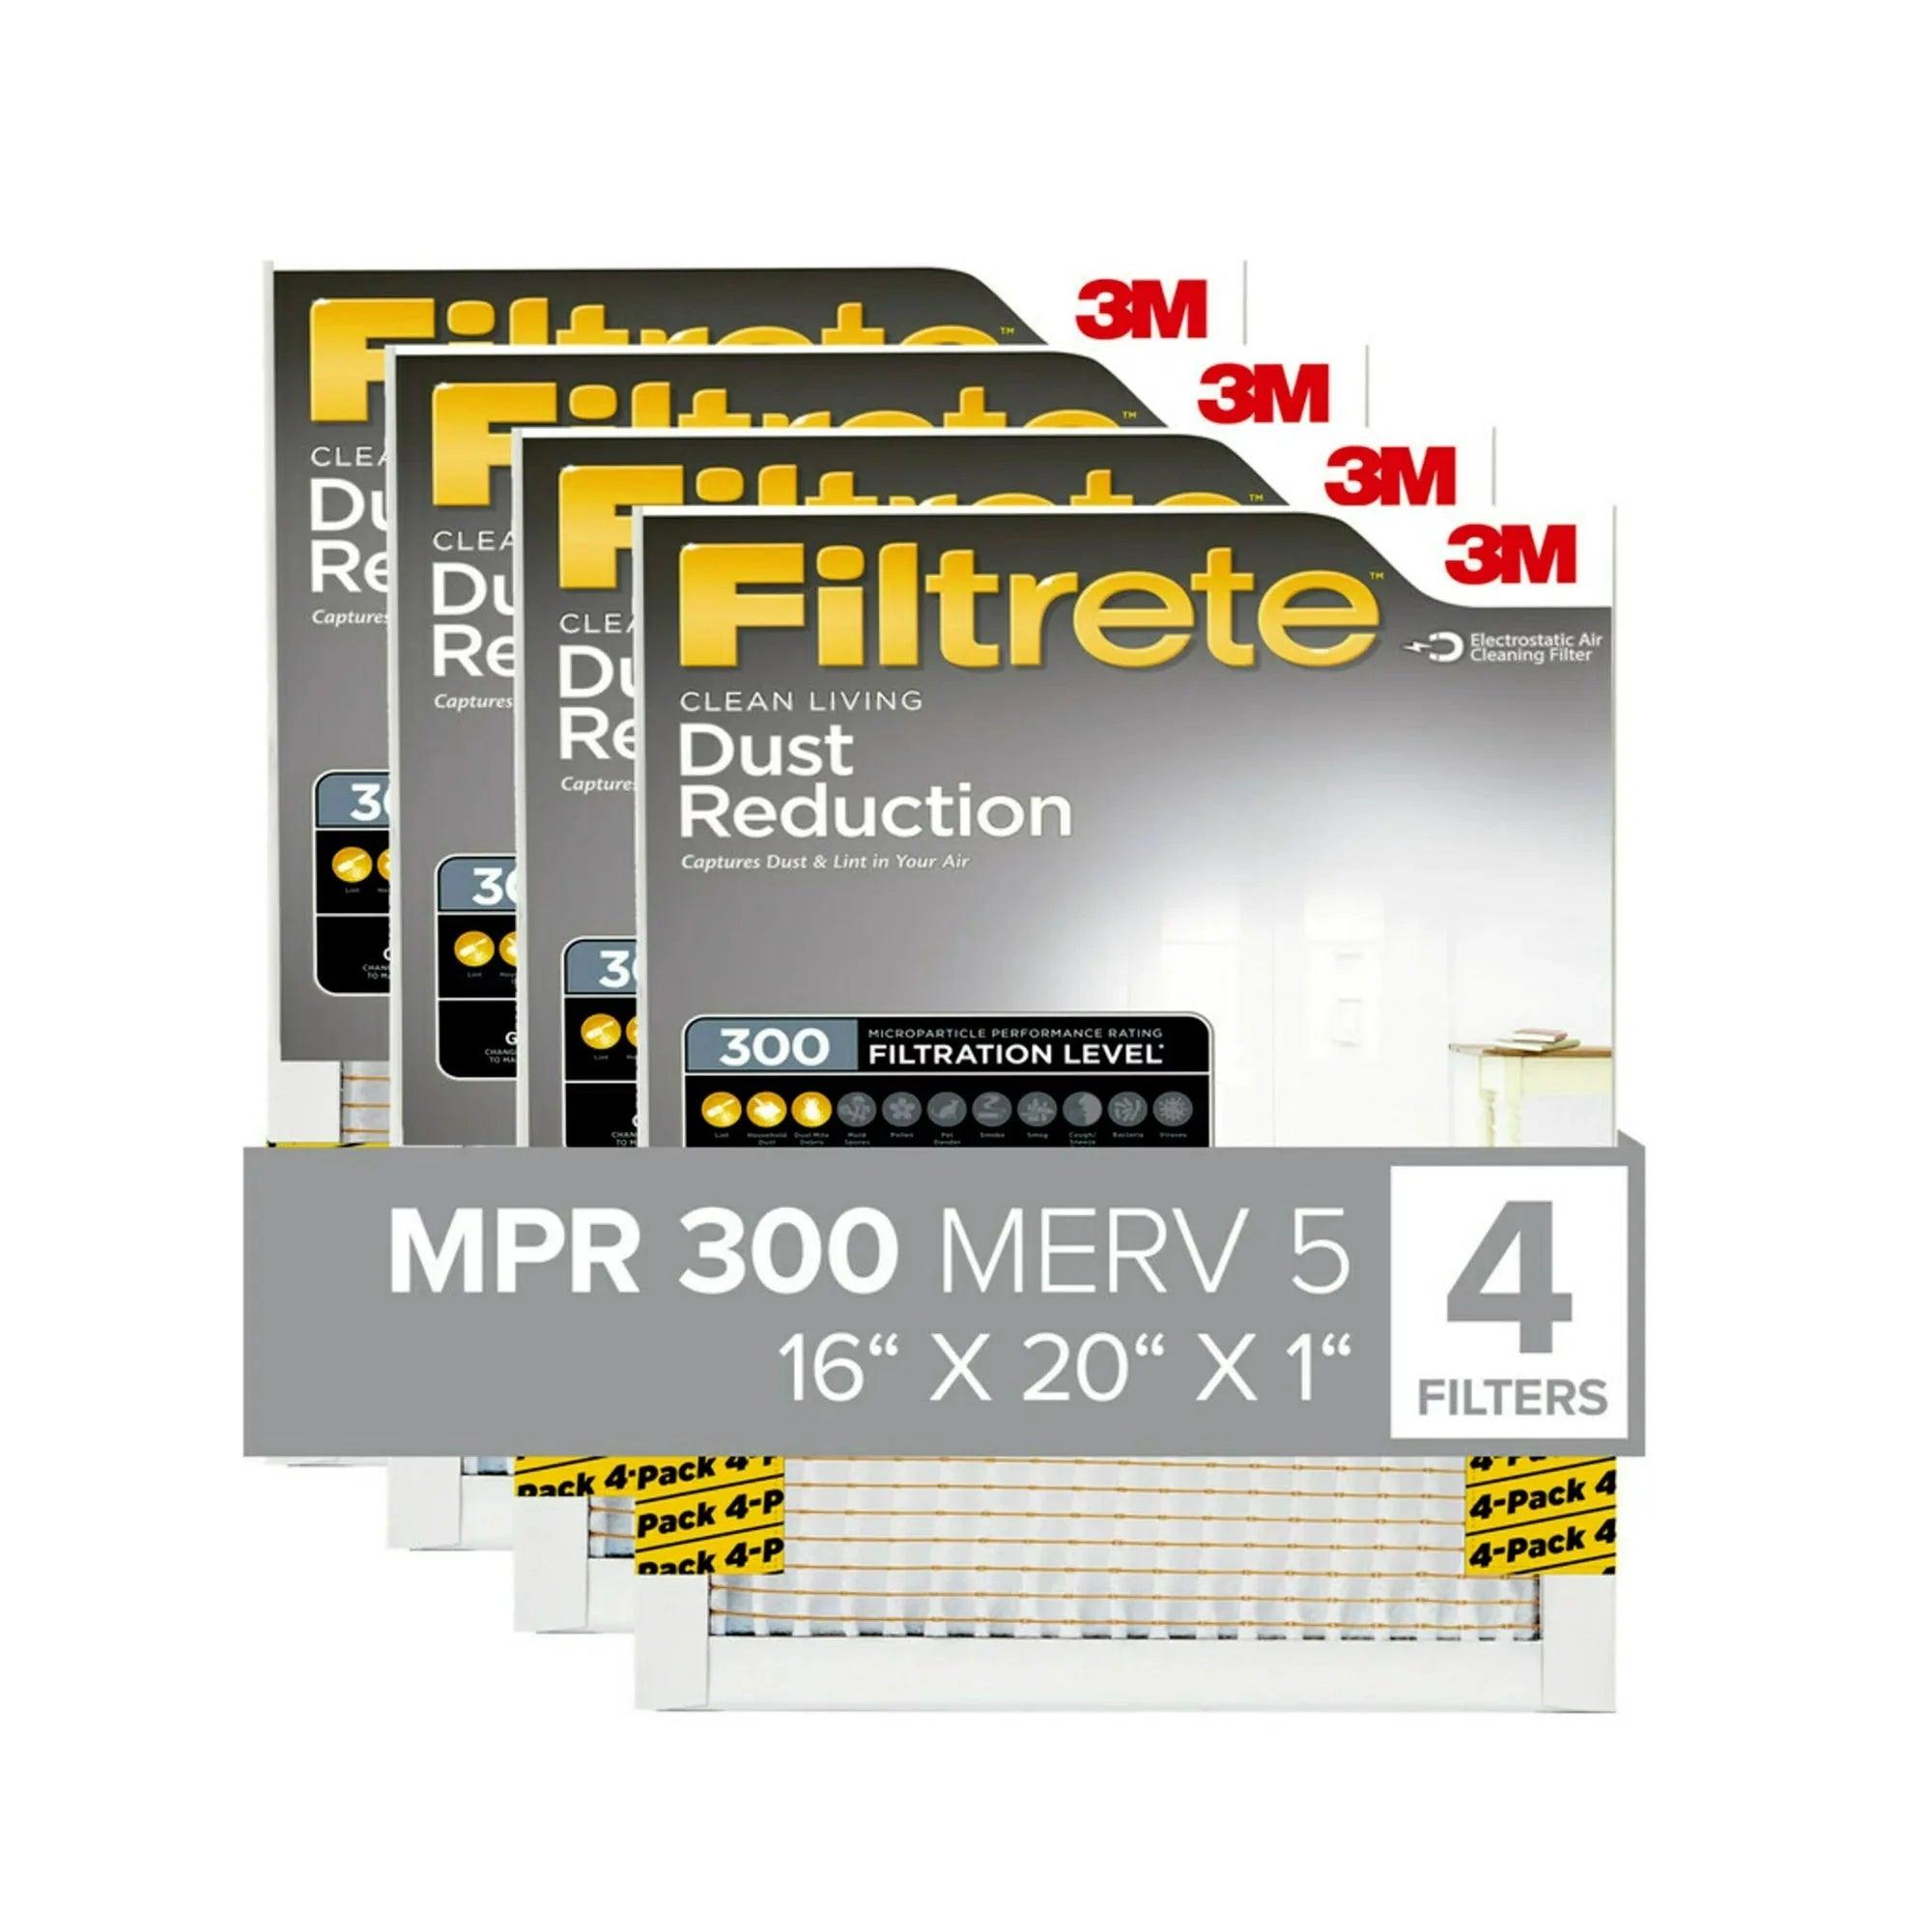 Wholesale prices with free shipping all over United States Filtrete 16x20x1 Air Filter, MPR 300 MERV 5, Dust Reduction, 4 Filters - Steven Deals